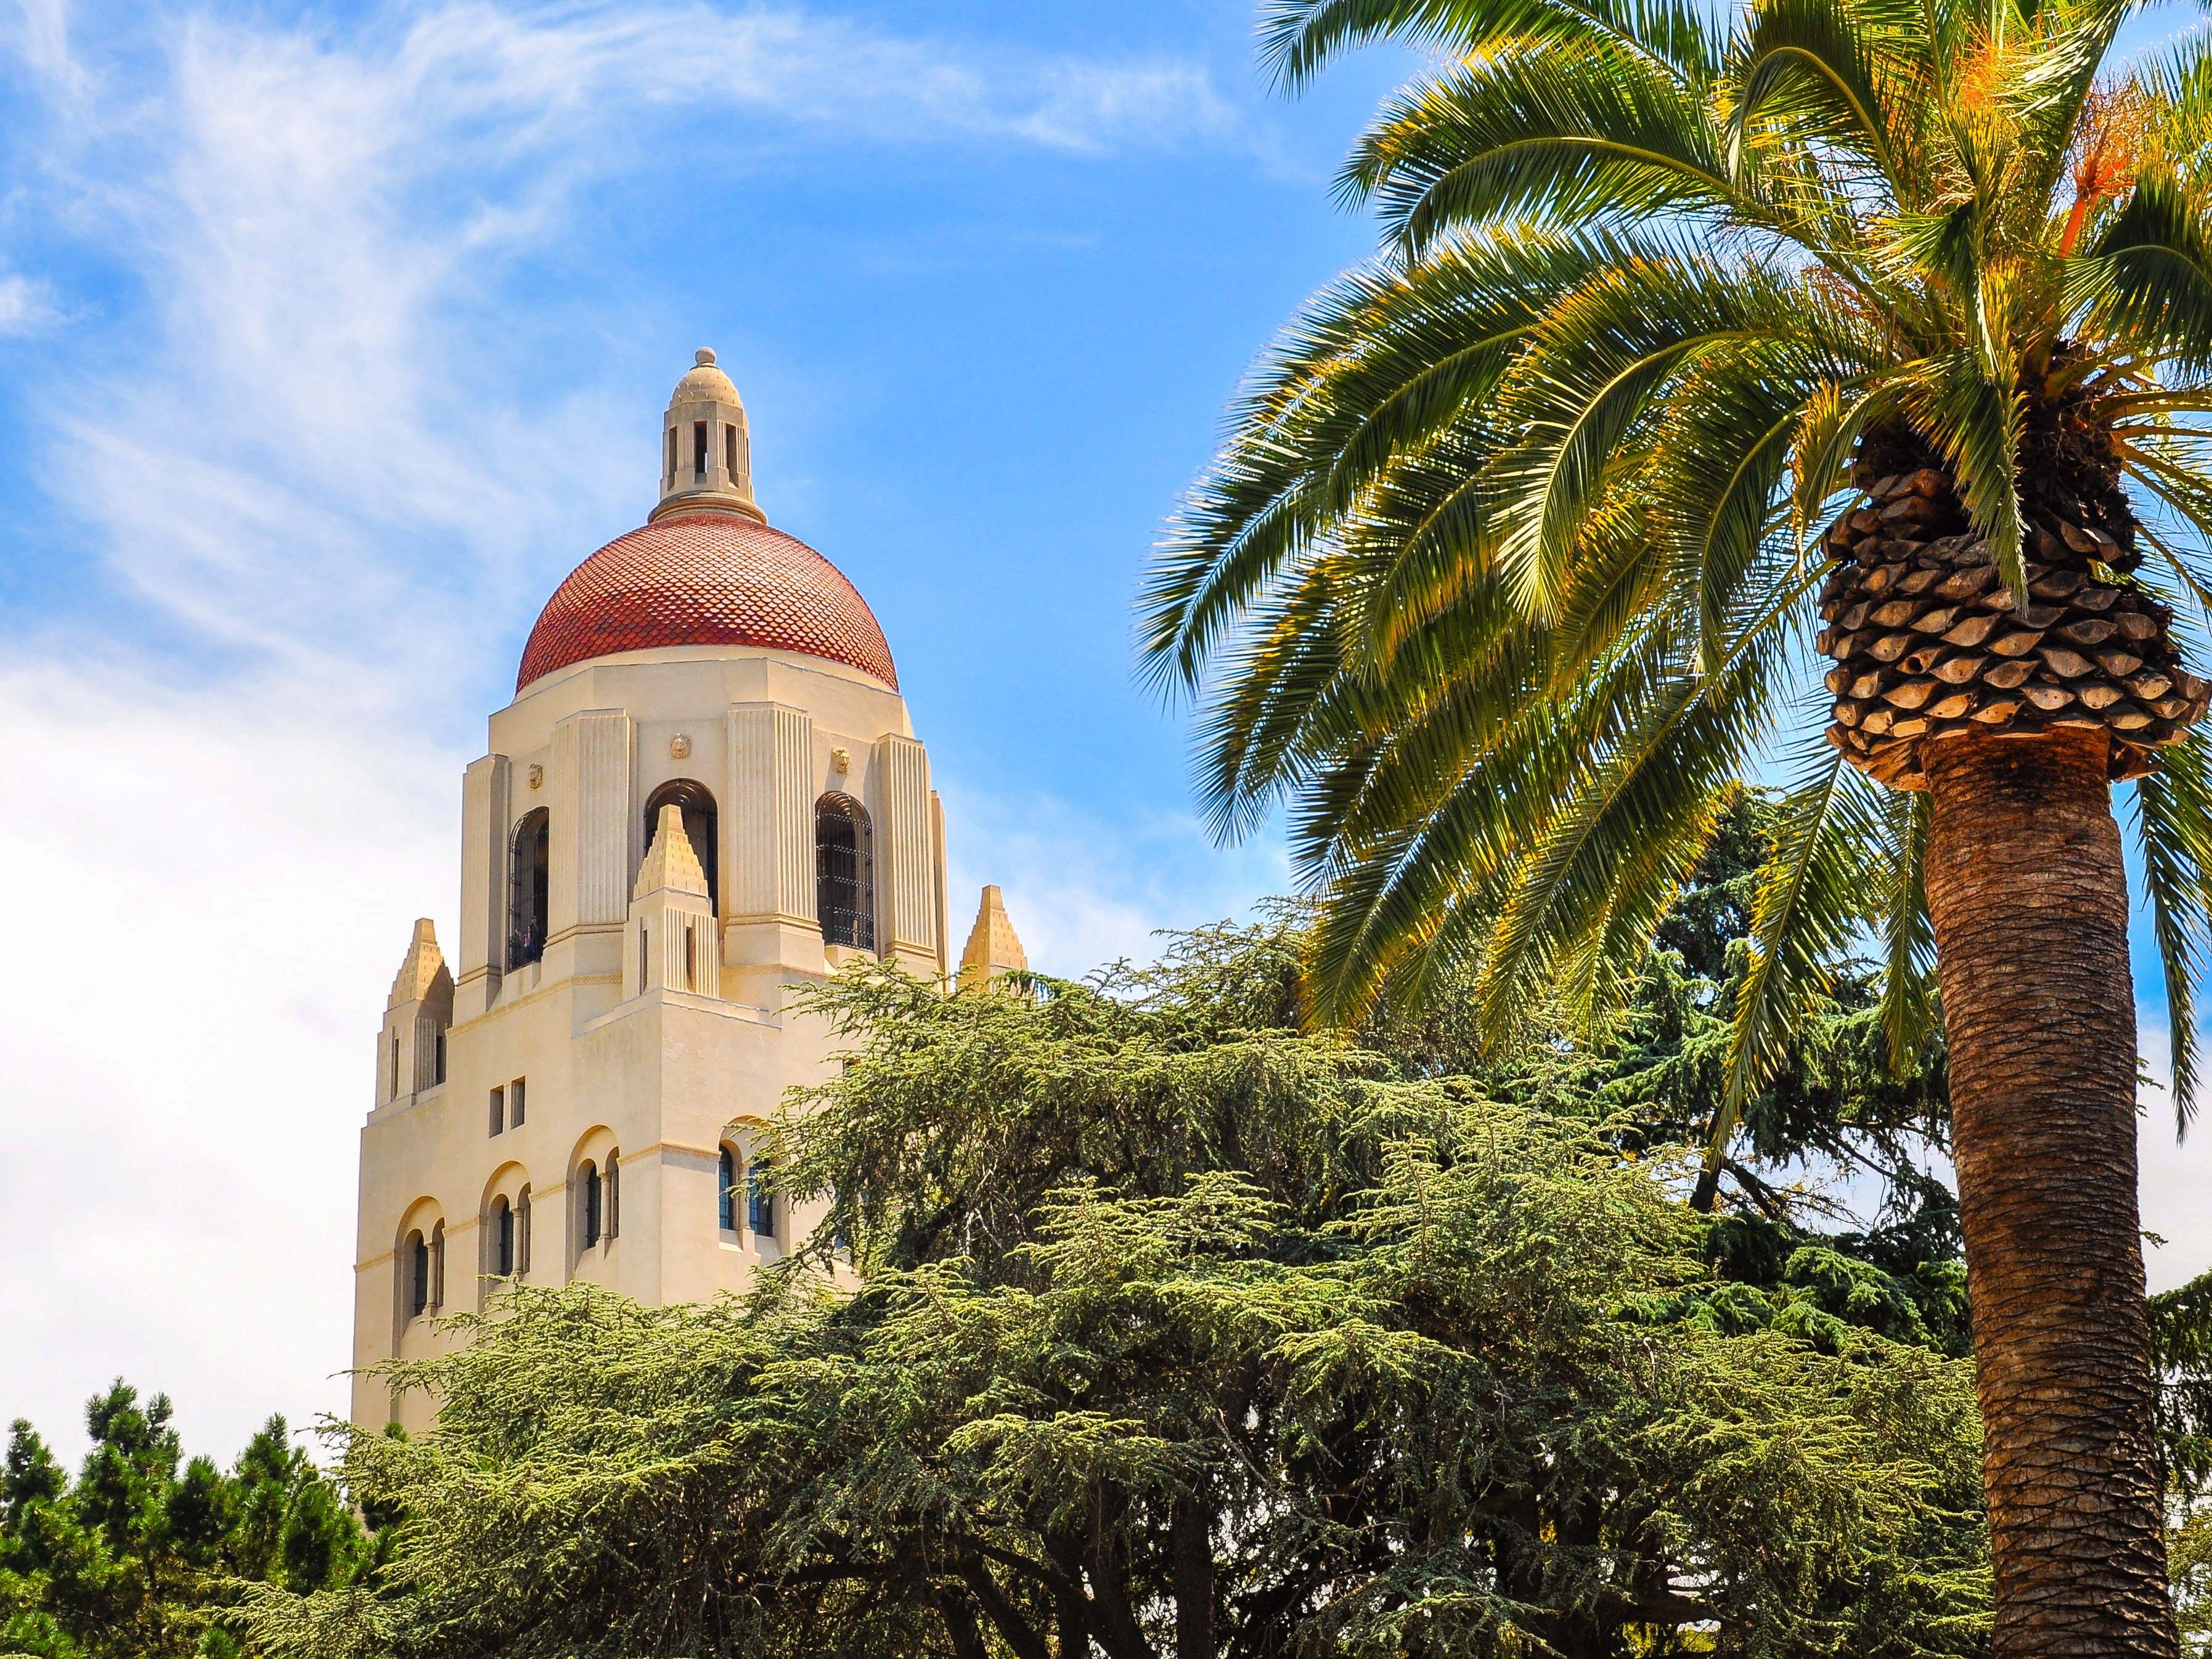 Stanford University has said it is investigating an incident involving a noose as a hate crime